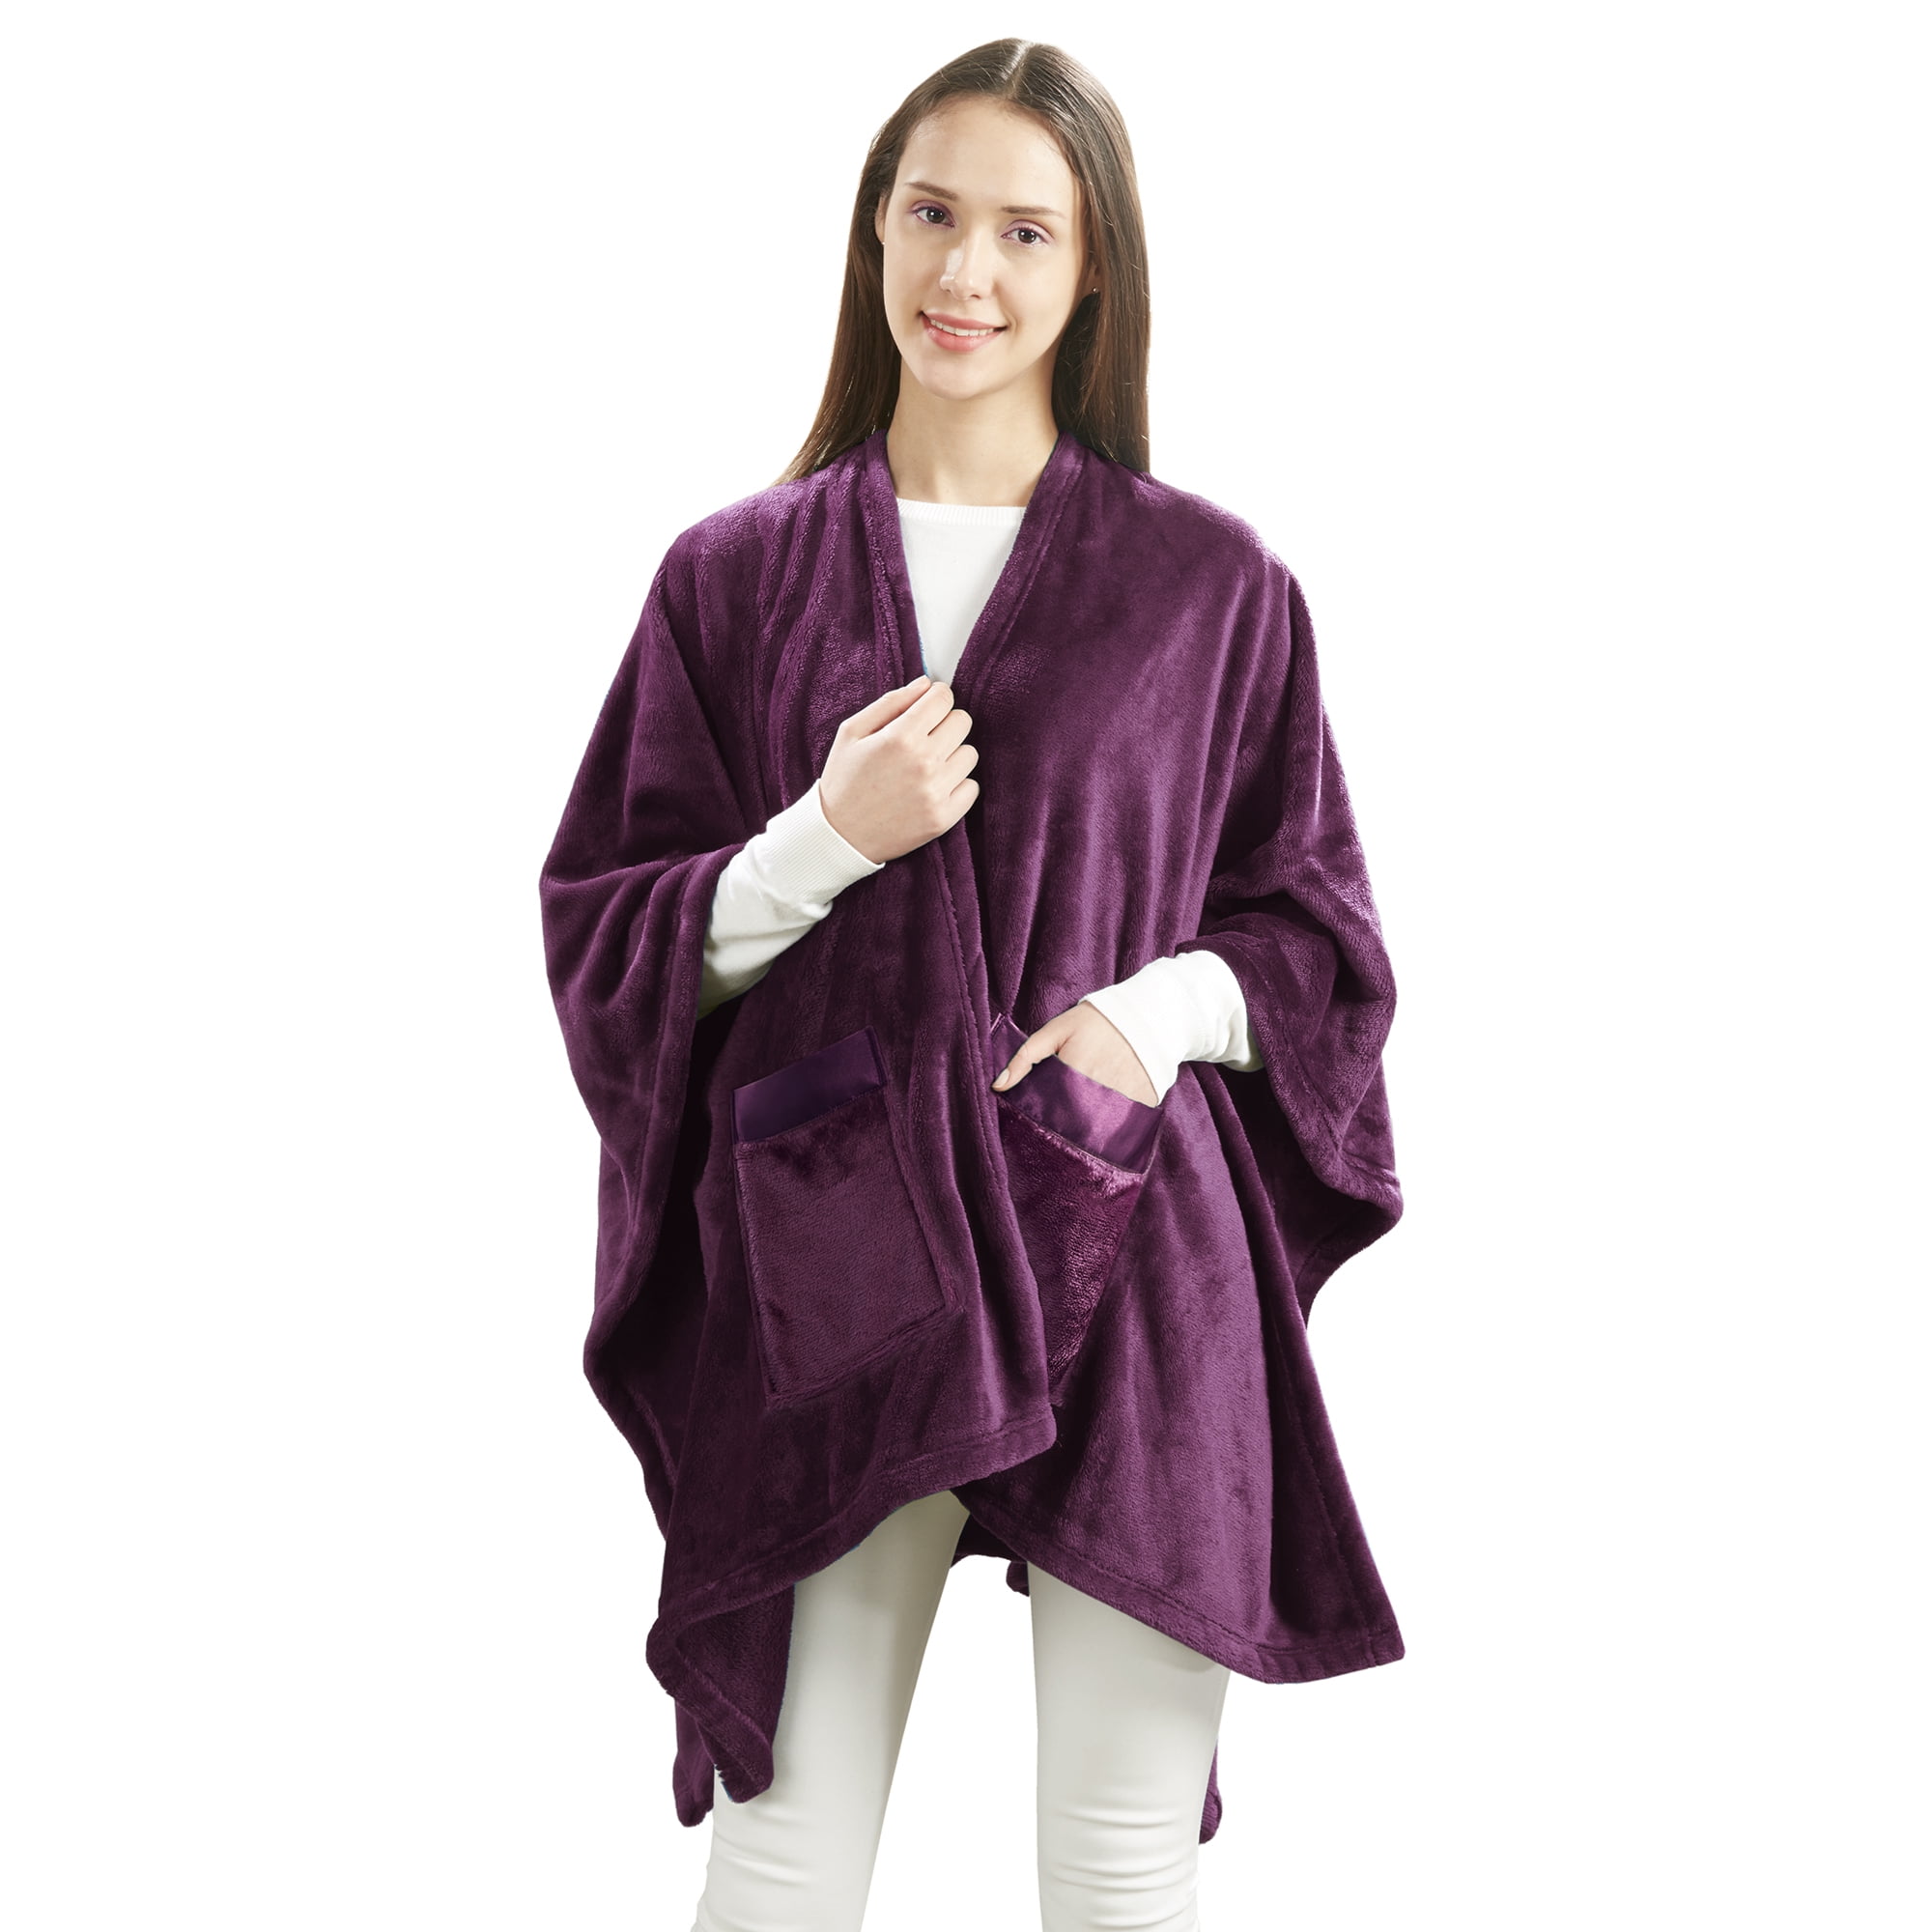 Giftable and Wearable Angel Wrap Plush Throw Blanket with Pockets